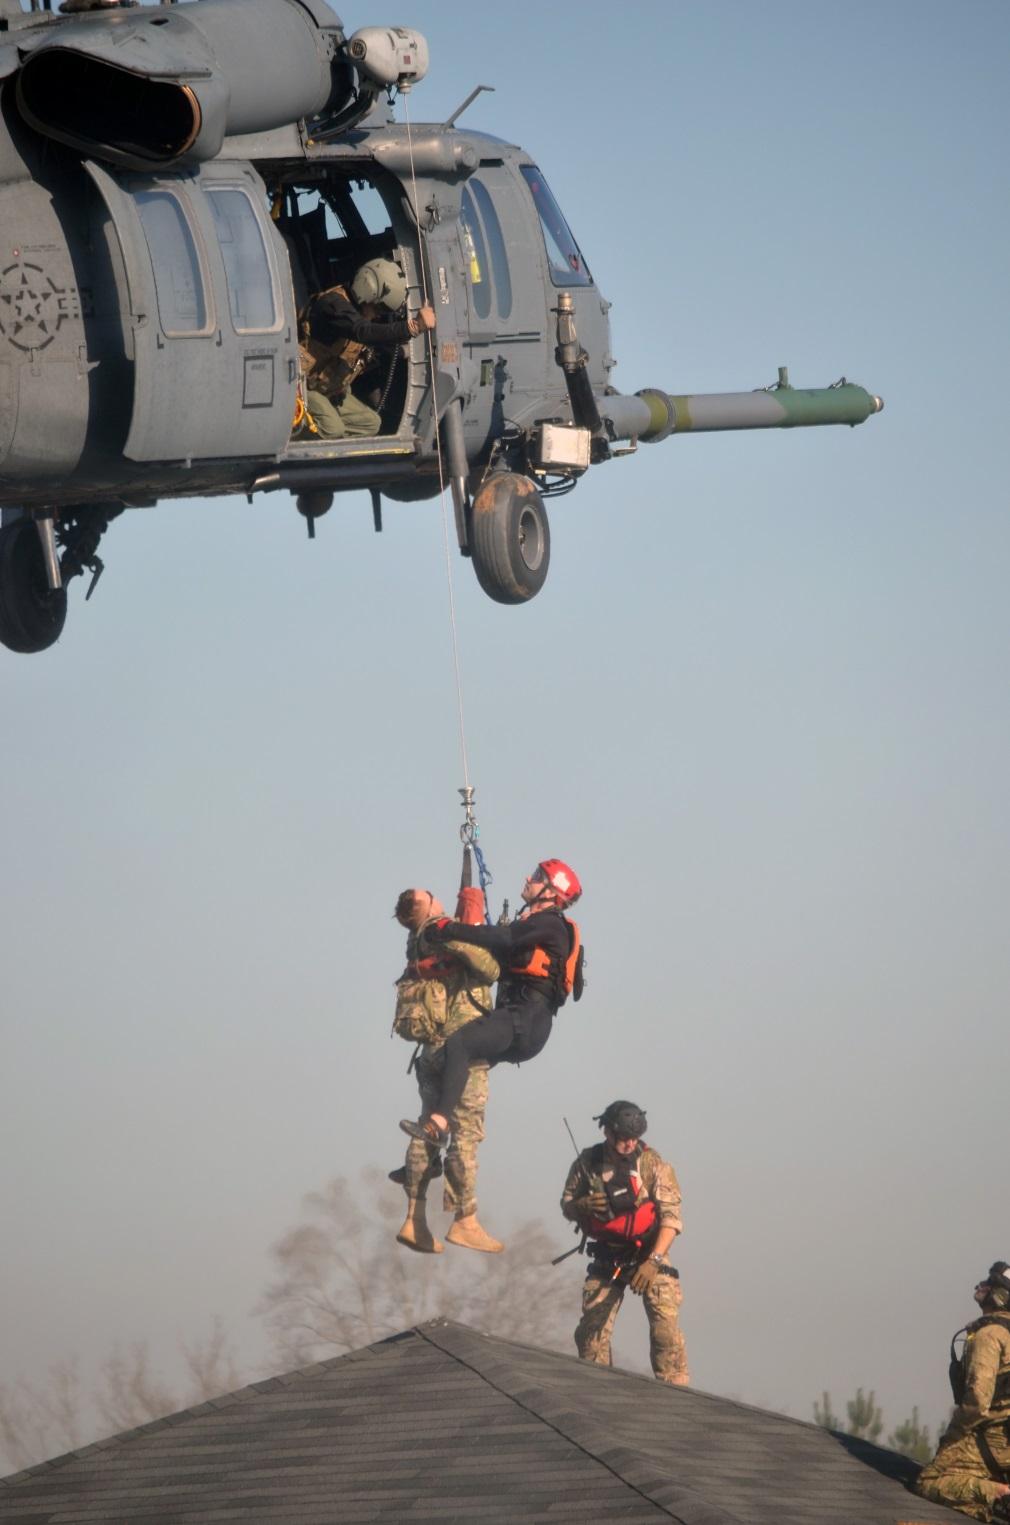 Pararescue Jumpers and Combat Rescue Officers, 920th Rescue Wing, Patrick AFB, Fla., conduct search and rescue response during Katrina-like flood training March 8, 2015 in Perry, GA.